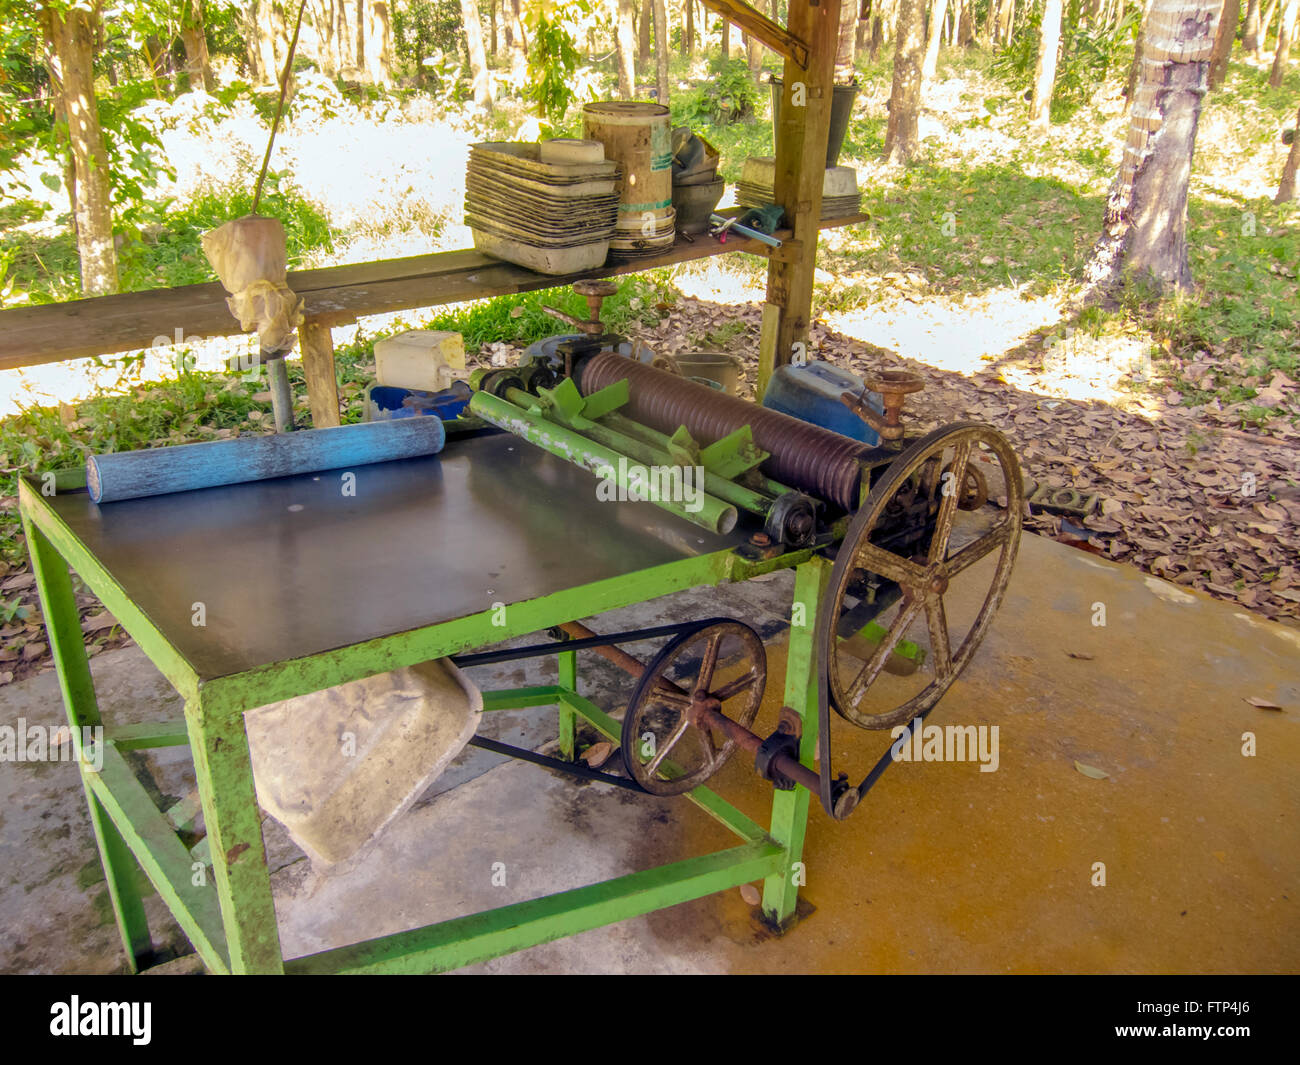 Rubber plantation on the island of Kho Yao Yai Thailand, piece of machinery to spread out the rubber latex. Stock Photo